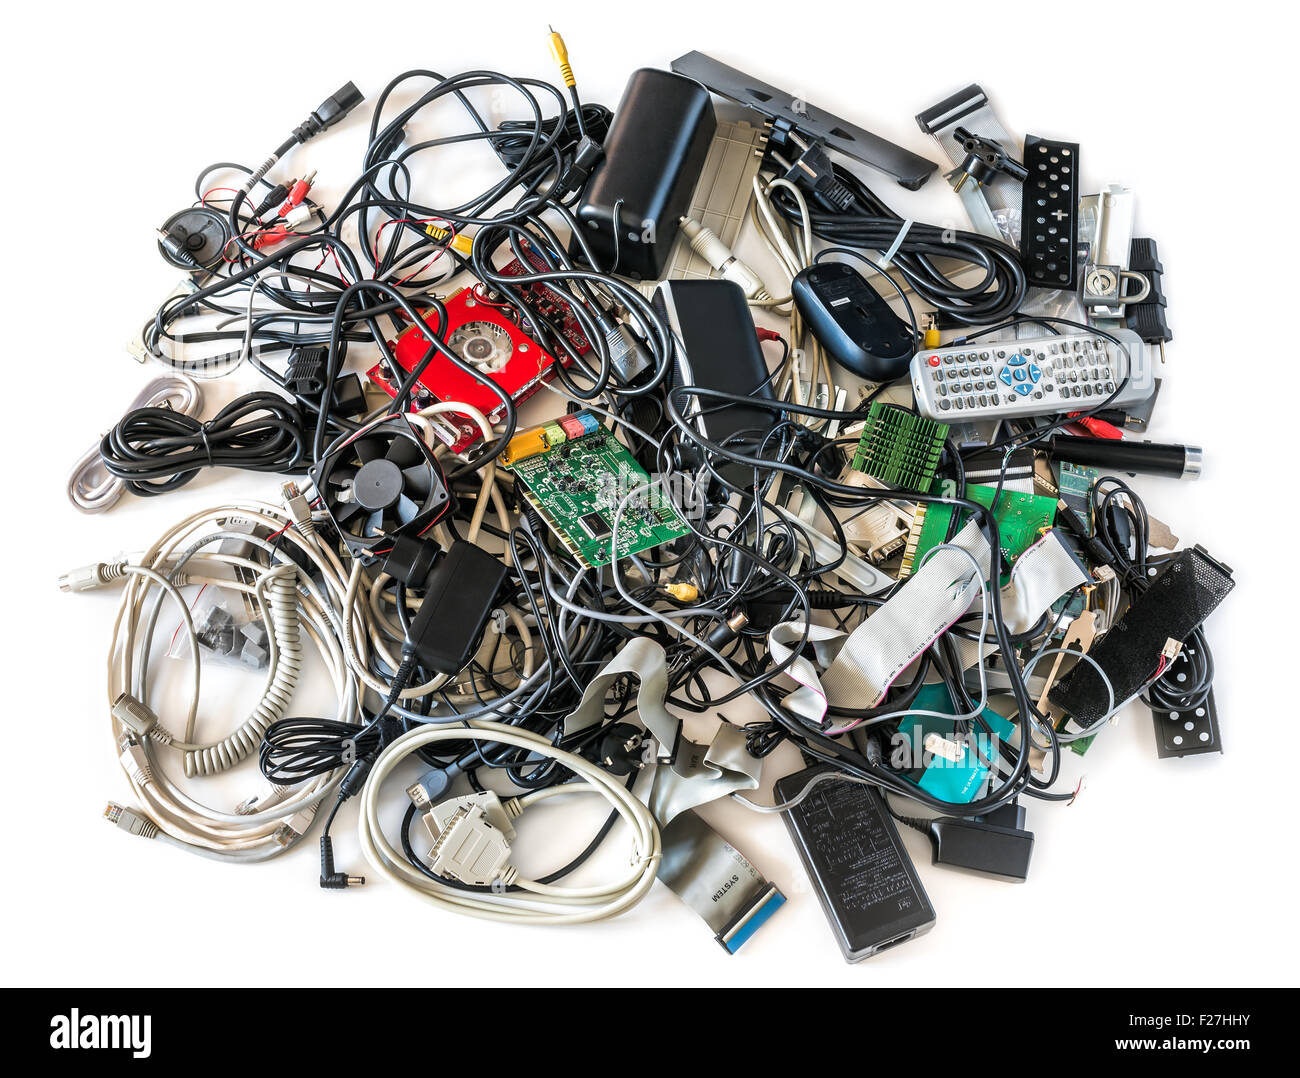 Pile of Old Computer Cables and Devices Isolated on White Background Stock Photo